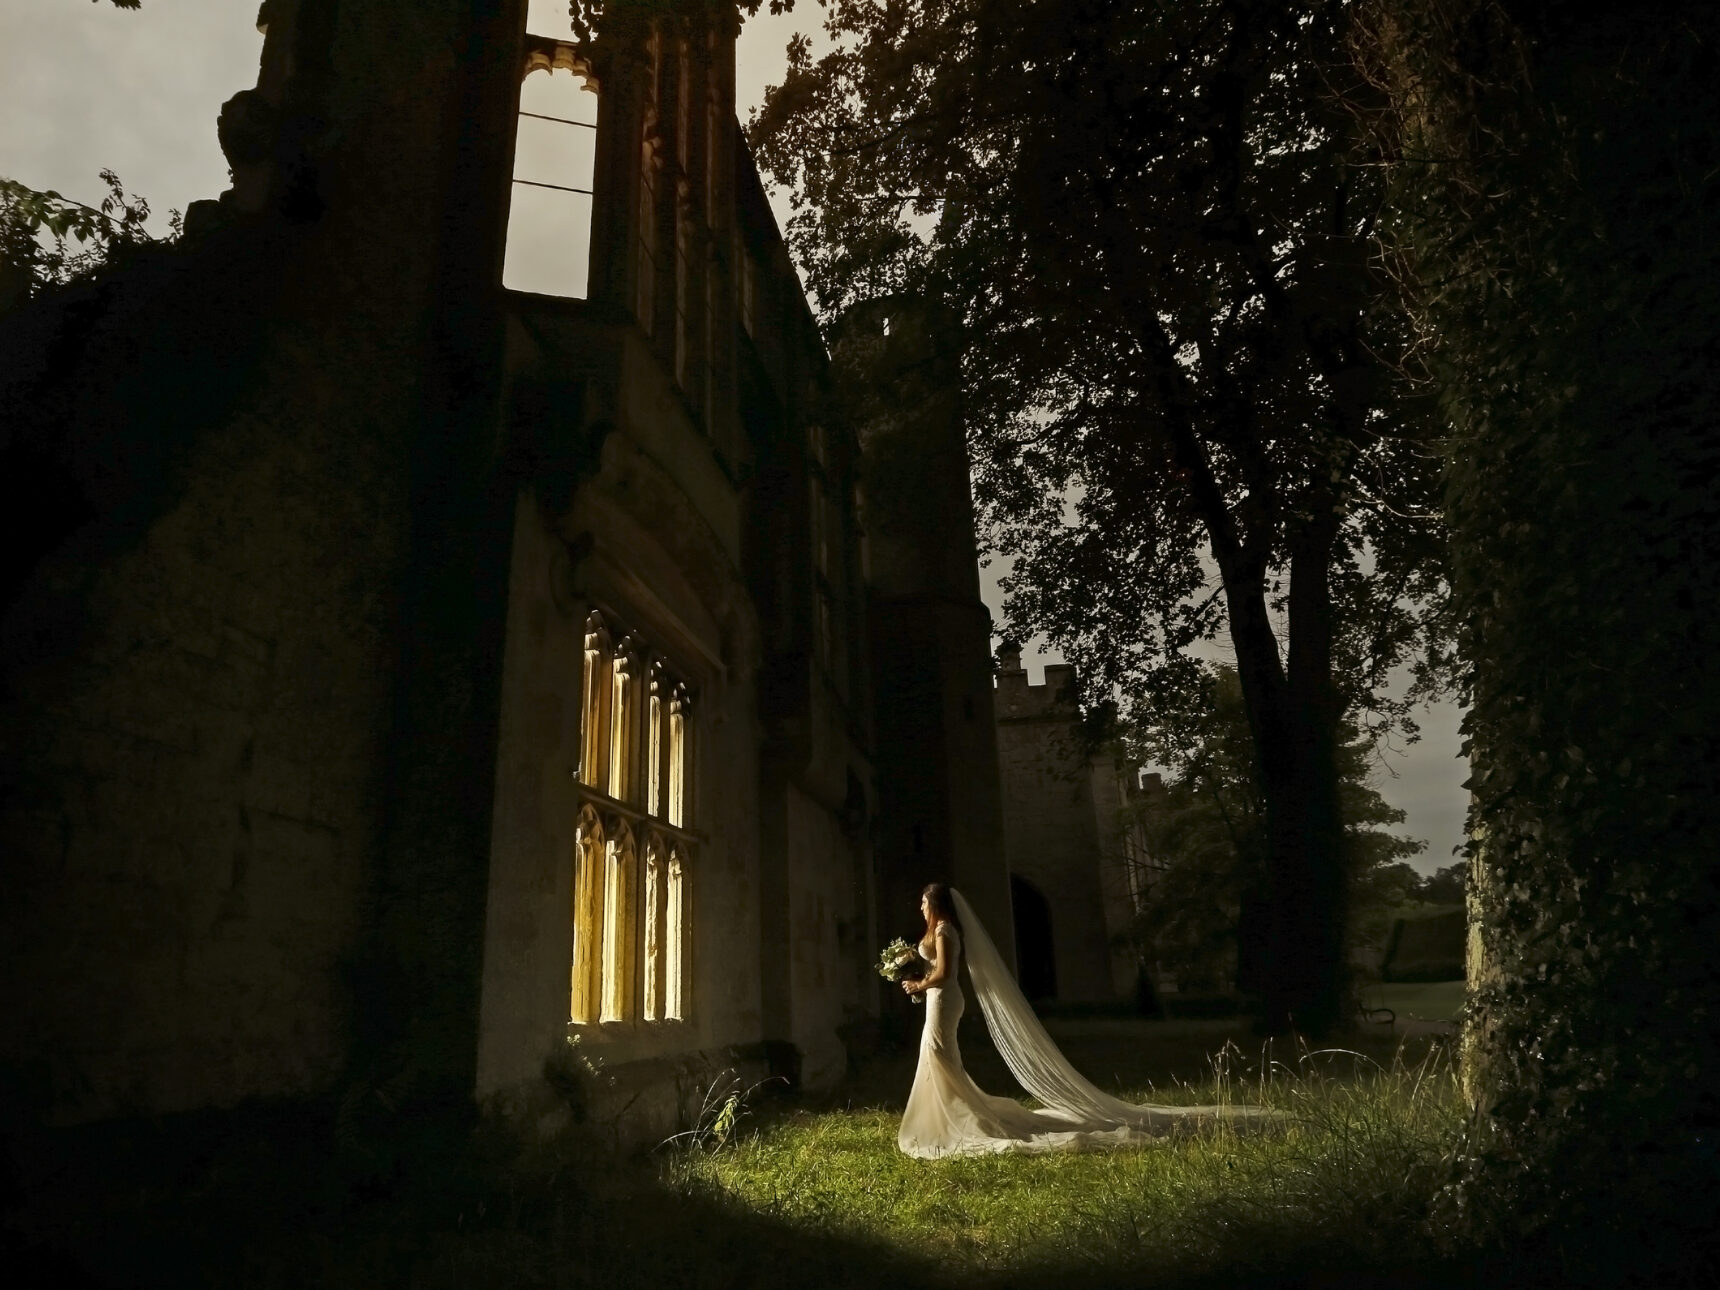 Sudeley's ruins offer spectacular backdrops in all shades of light